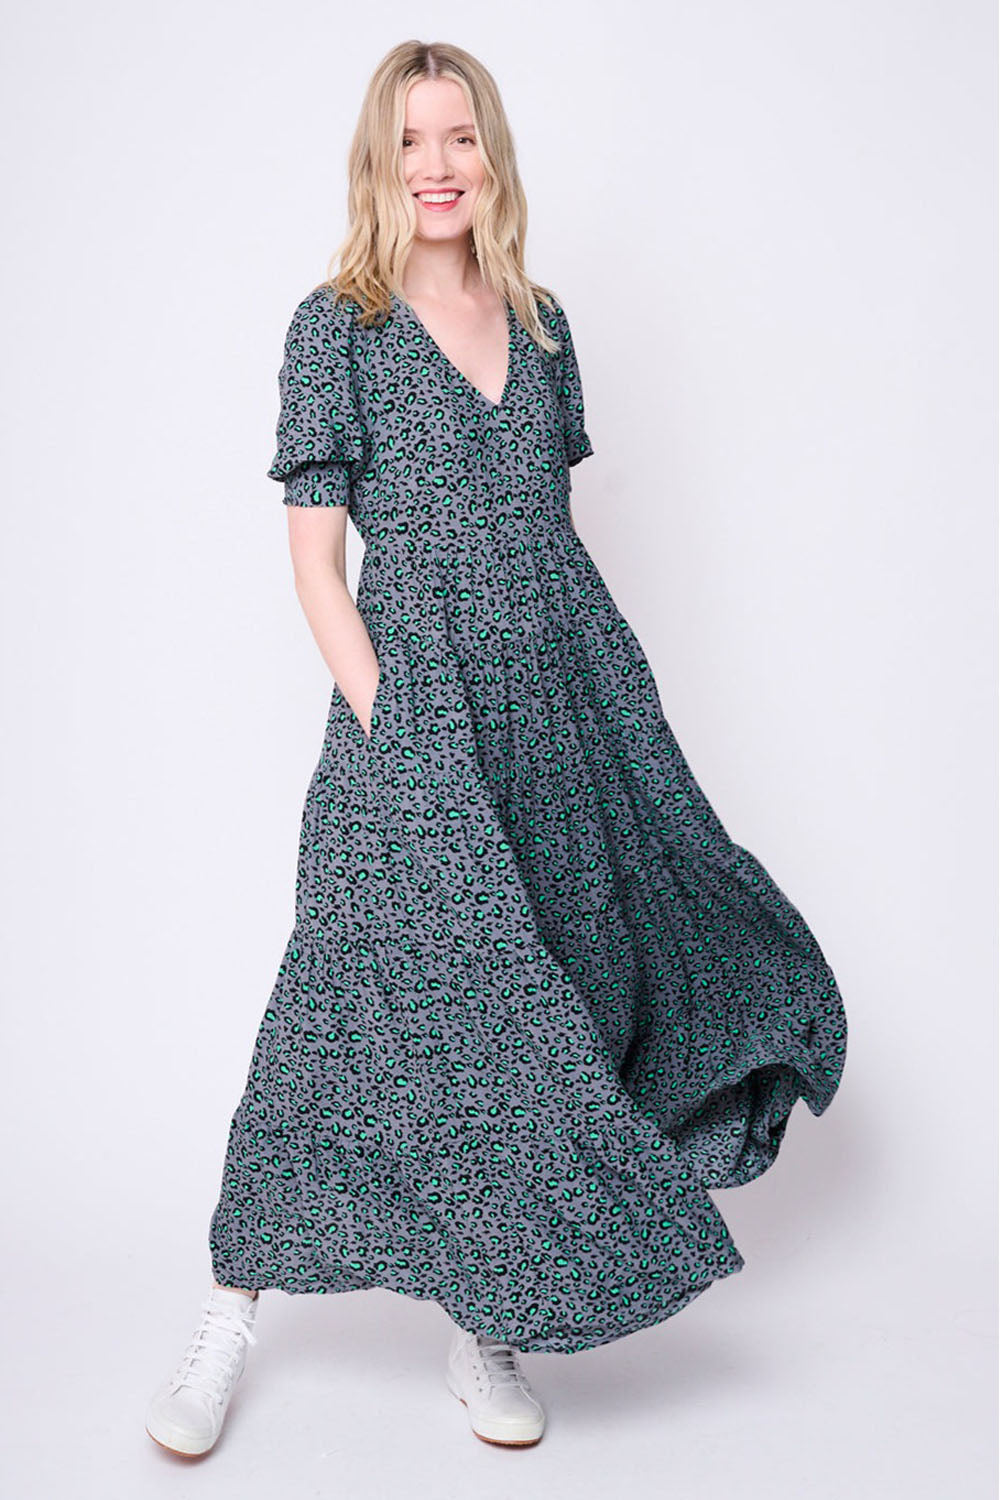 Grey with Black and Green Snow Leopard Maxi Dress